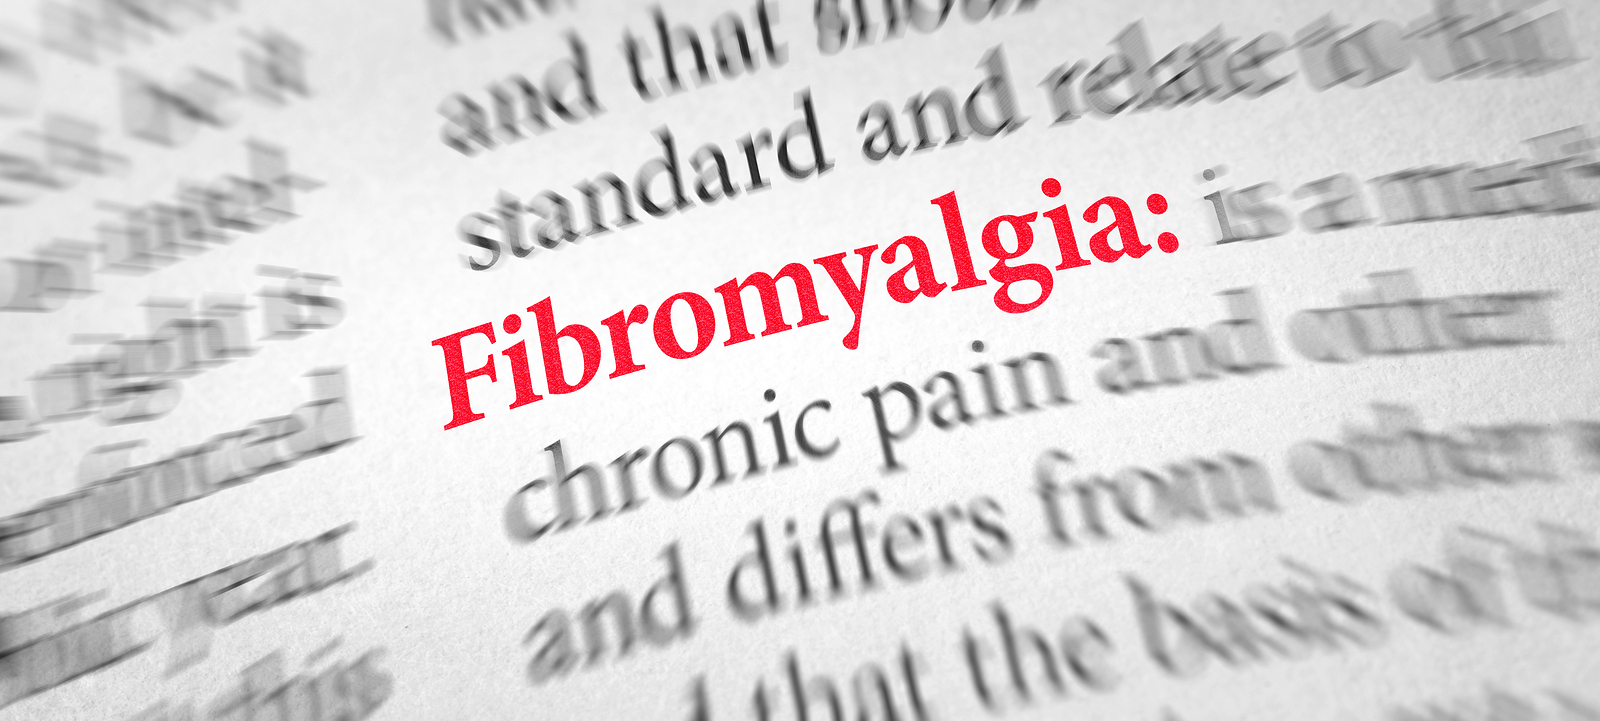 Definition Of The Word Fibromyalgia In A Dictionary